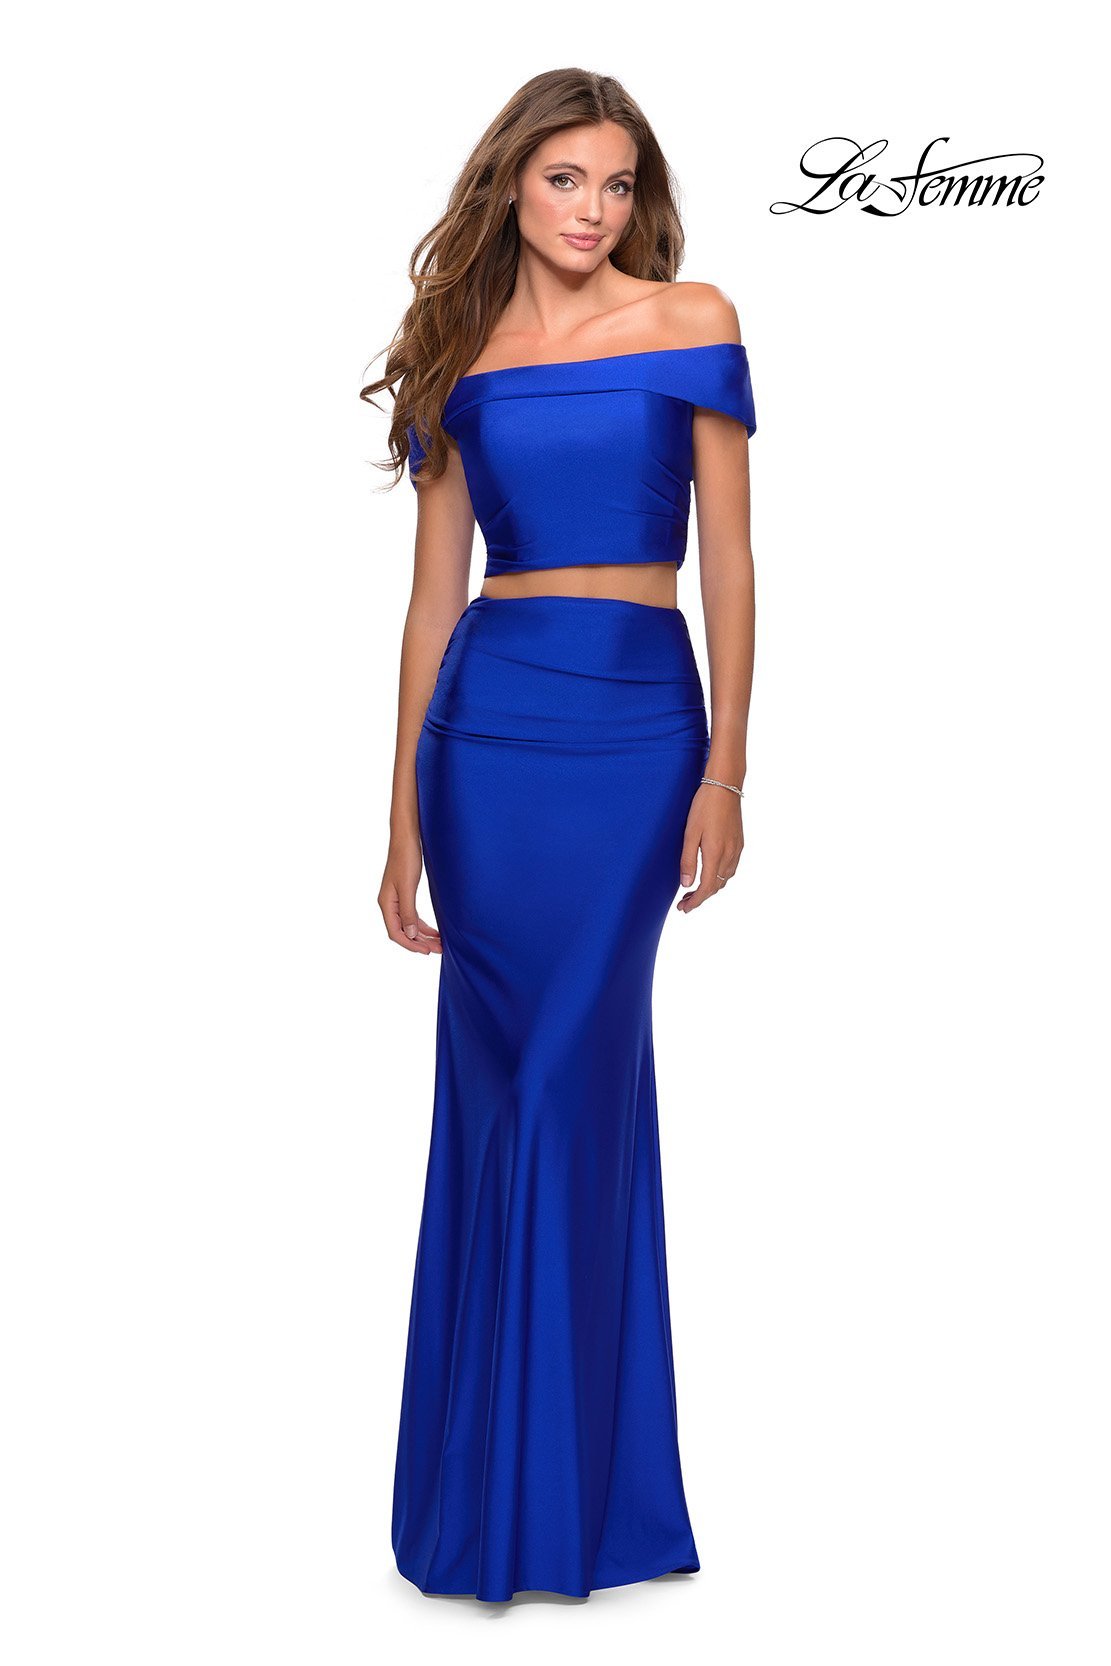 La Femme 28578 dress images in these colors: Red, Royal Blue, Royal Purple.